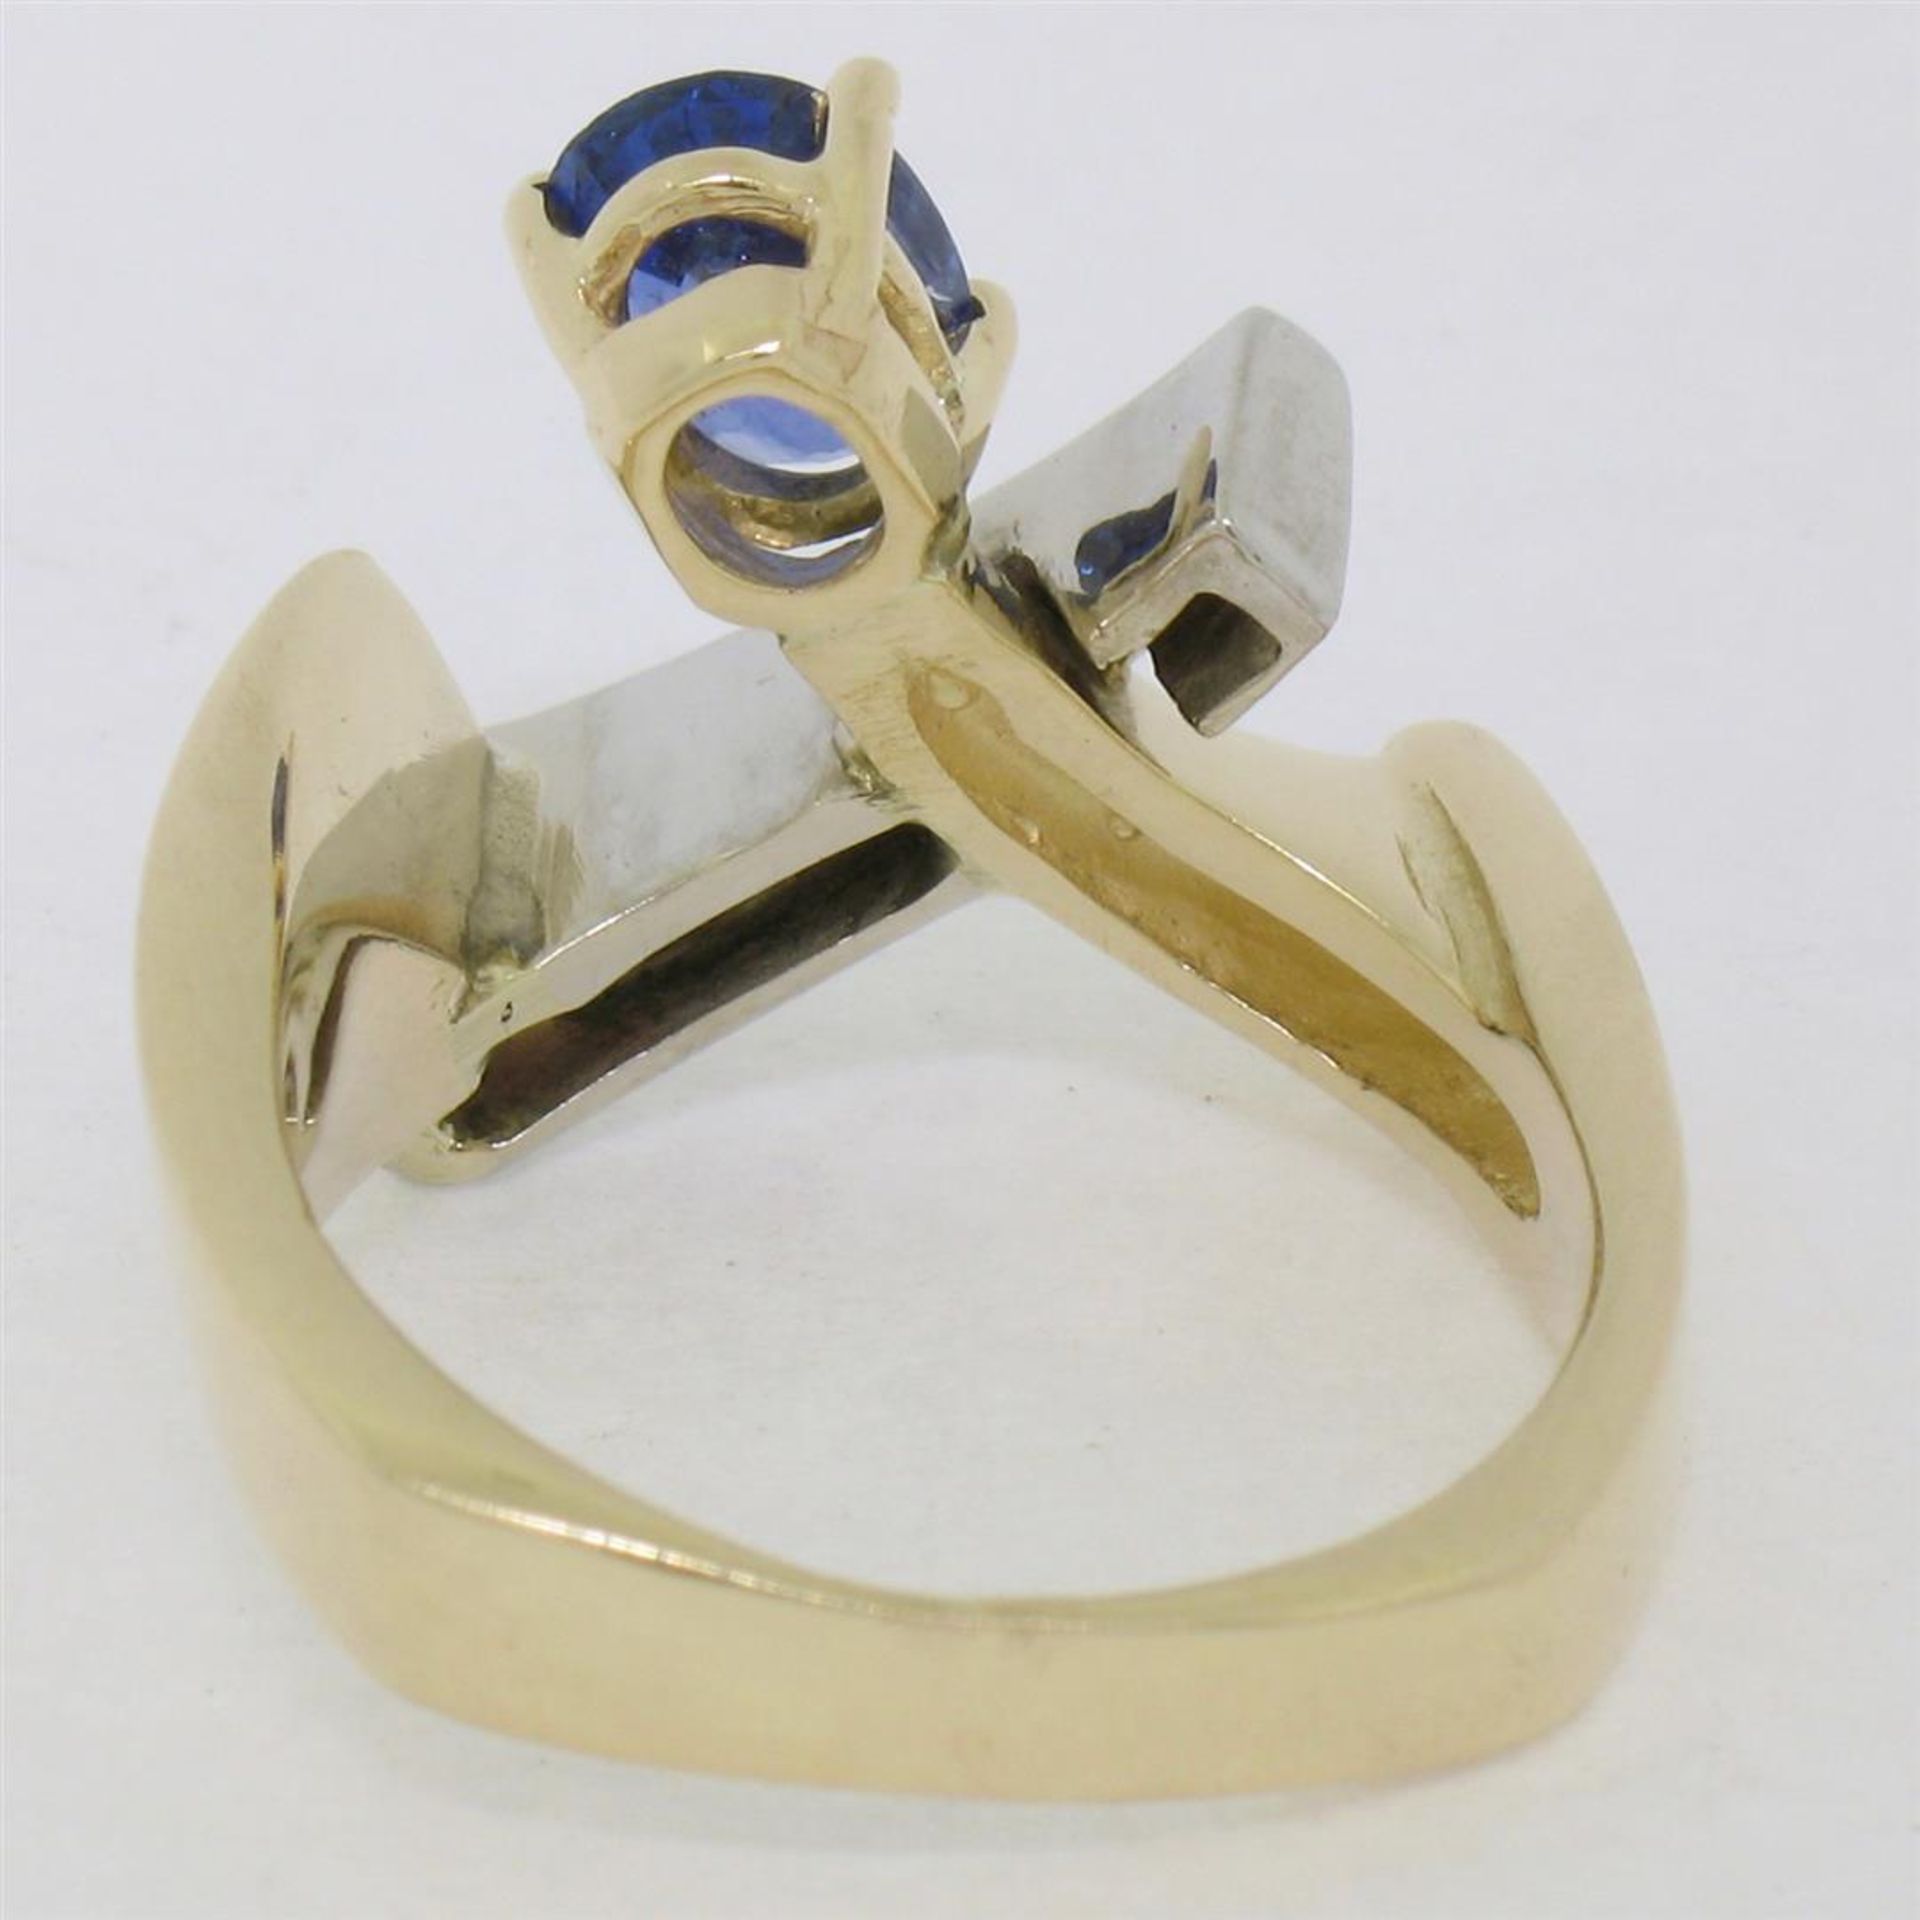 Two Tone 14K Gold 0.98ctw QUALITY Sapphire Solitaire Ring w/ 3 Diamond Accents - Image 4 of 7